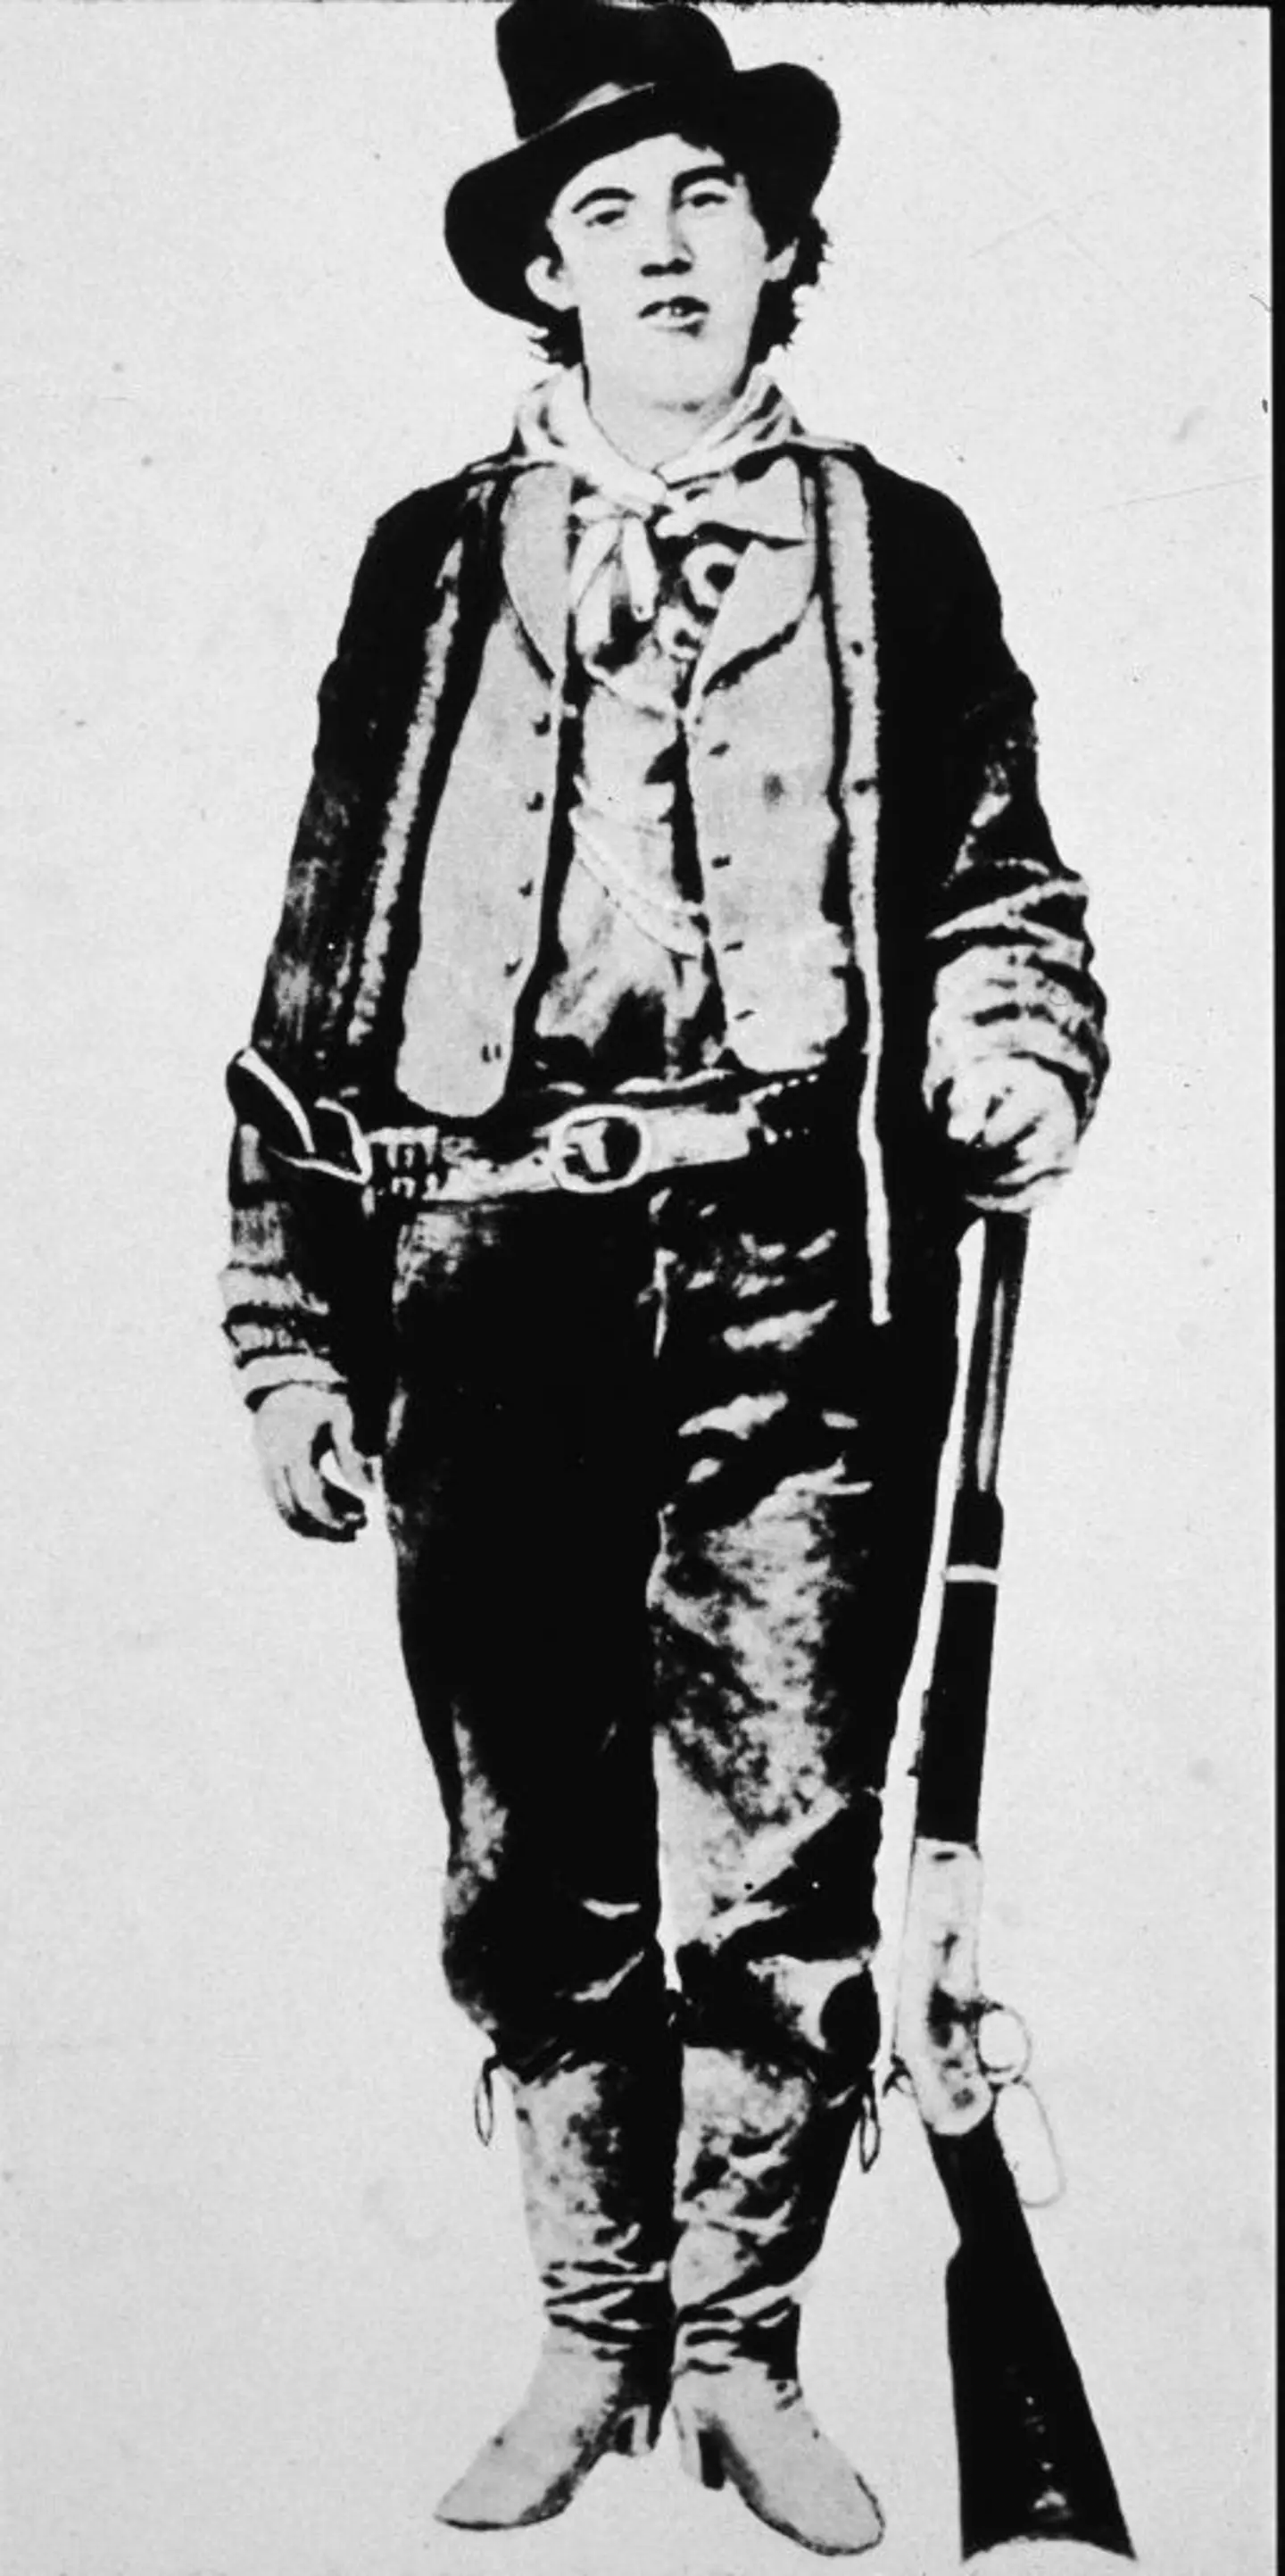 Billy the Kid was an Old West outlaw.